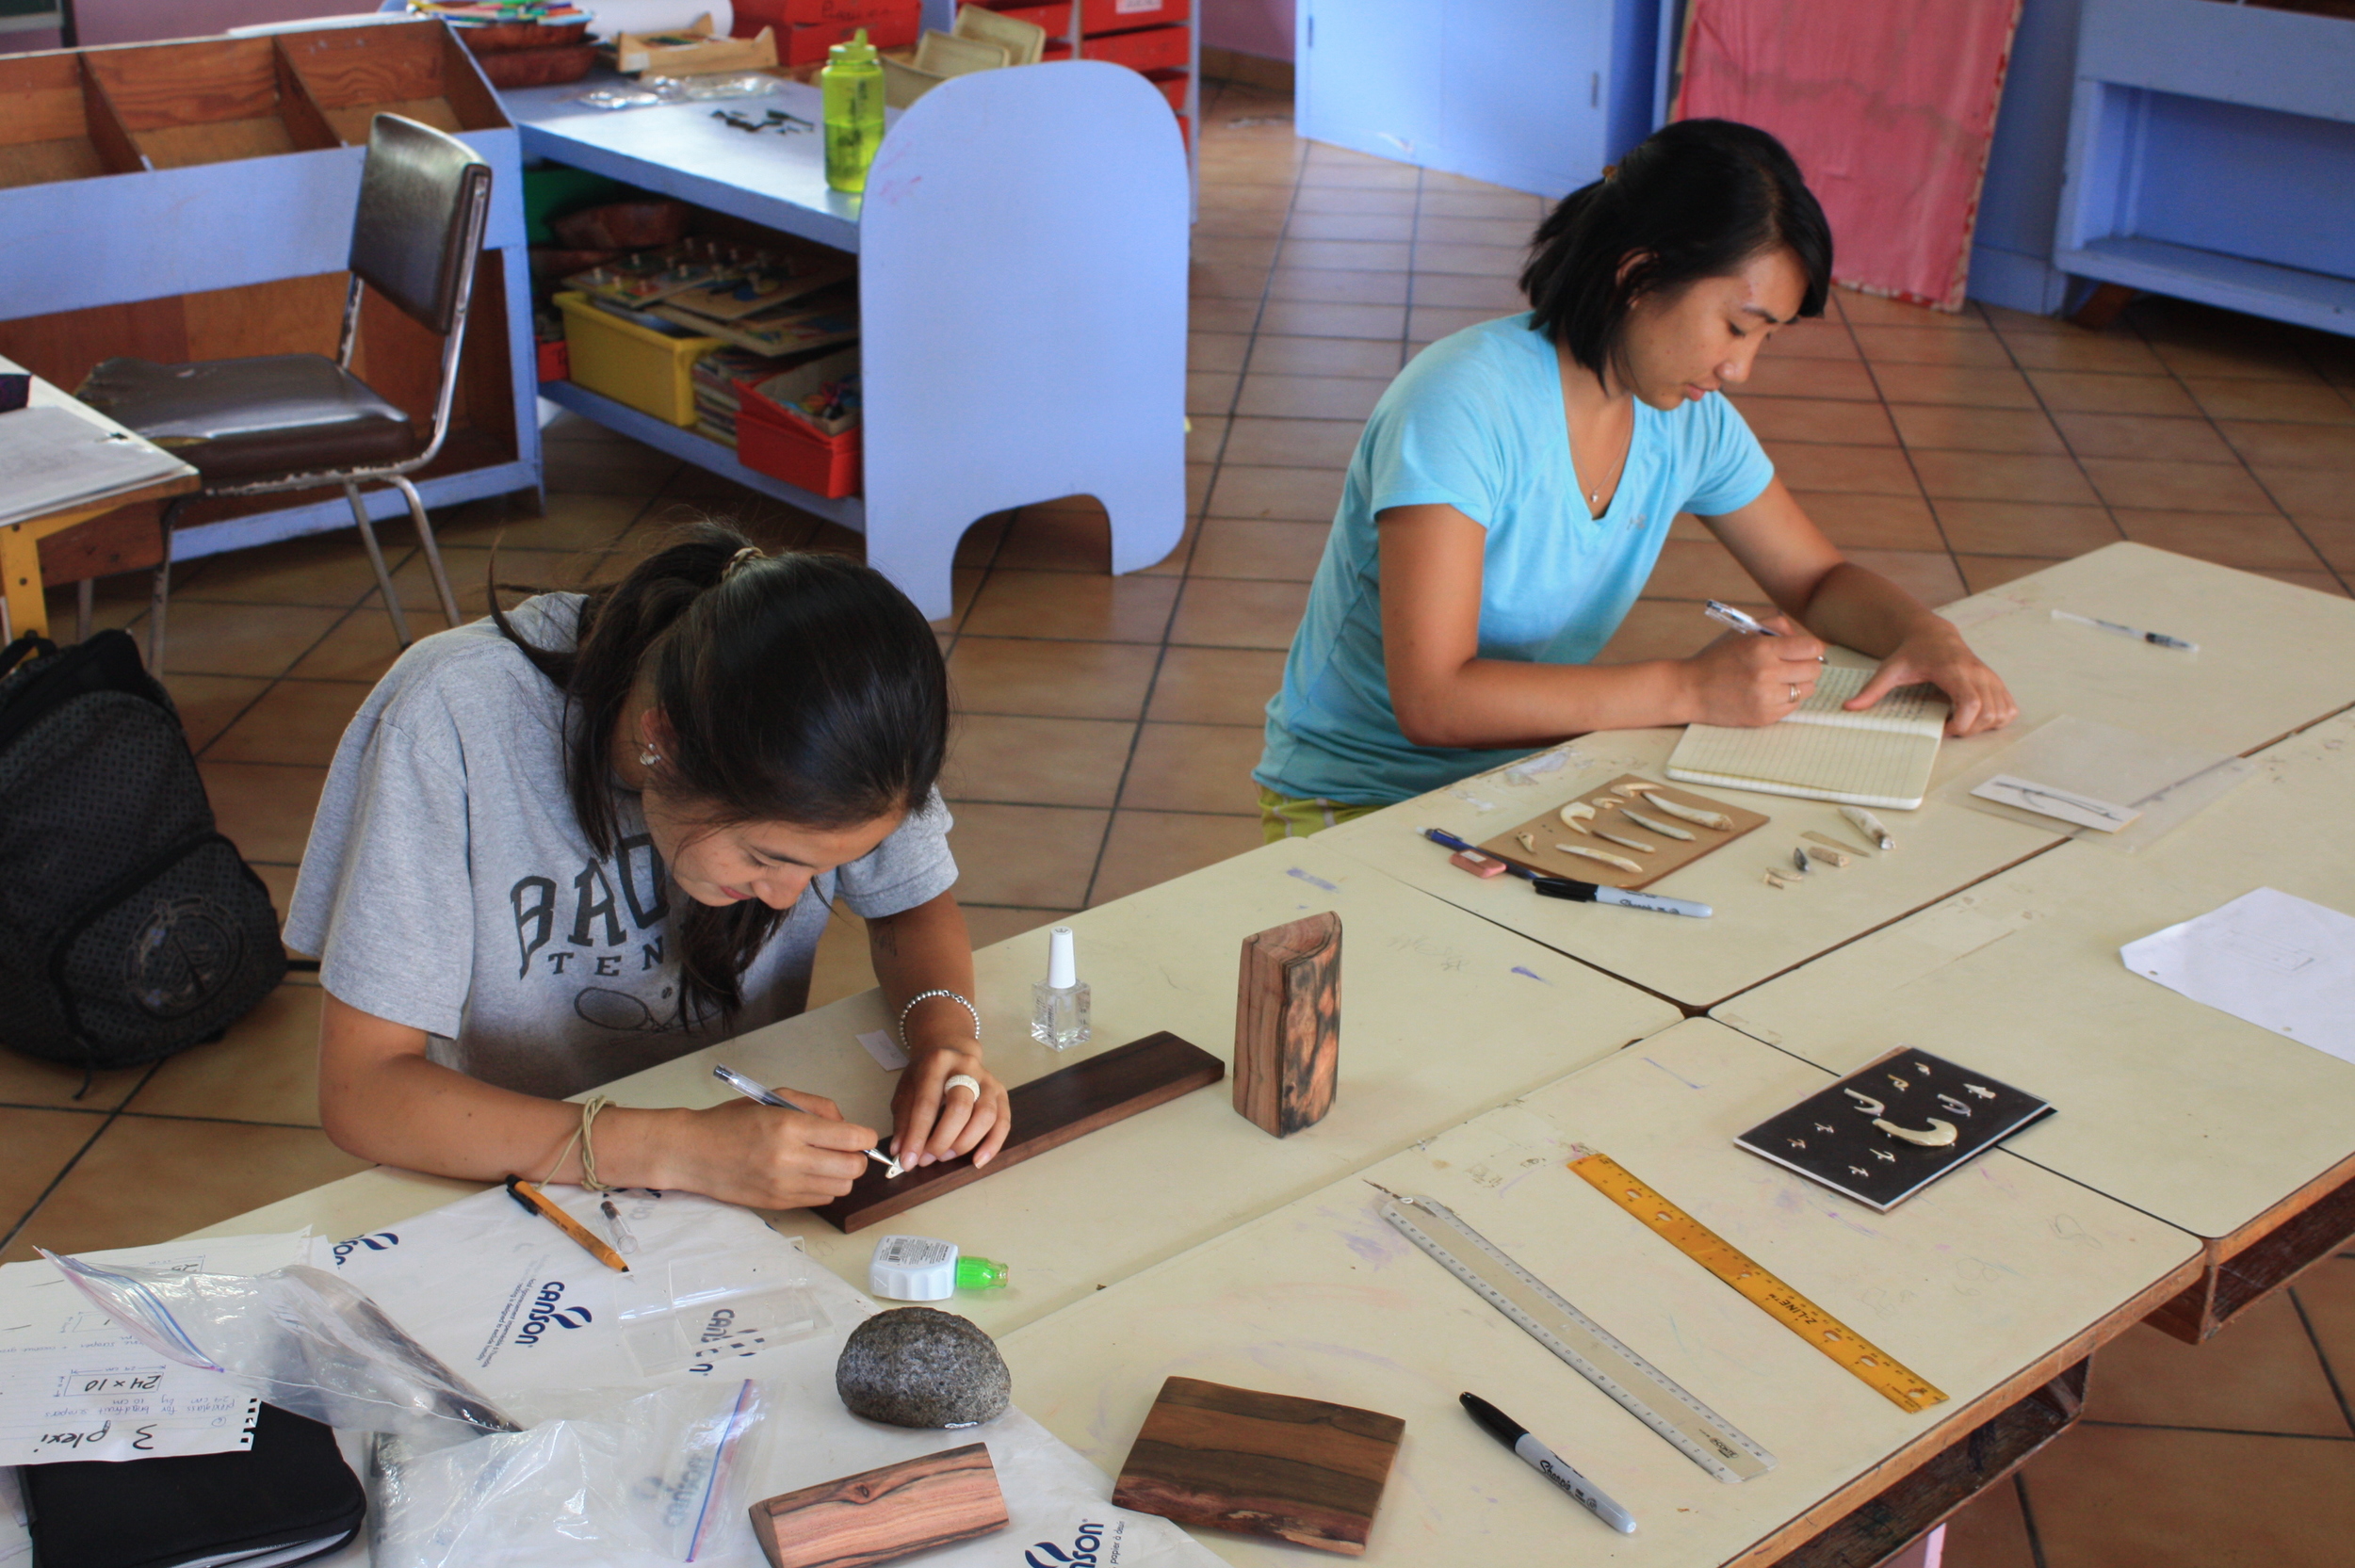 2013. Design and planning for the "Treasures of Tahuata" exhibit. In action: Michelle Kim and Emily Lowe. (Copy)